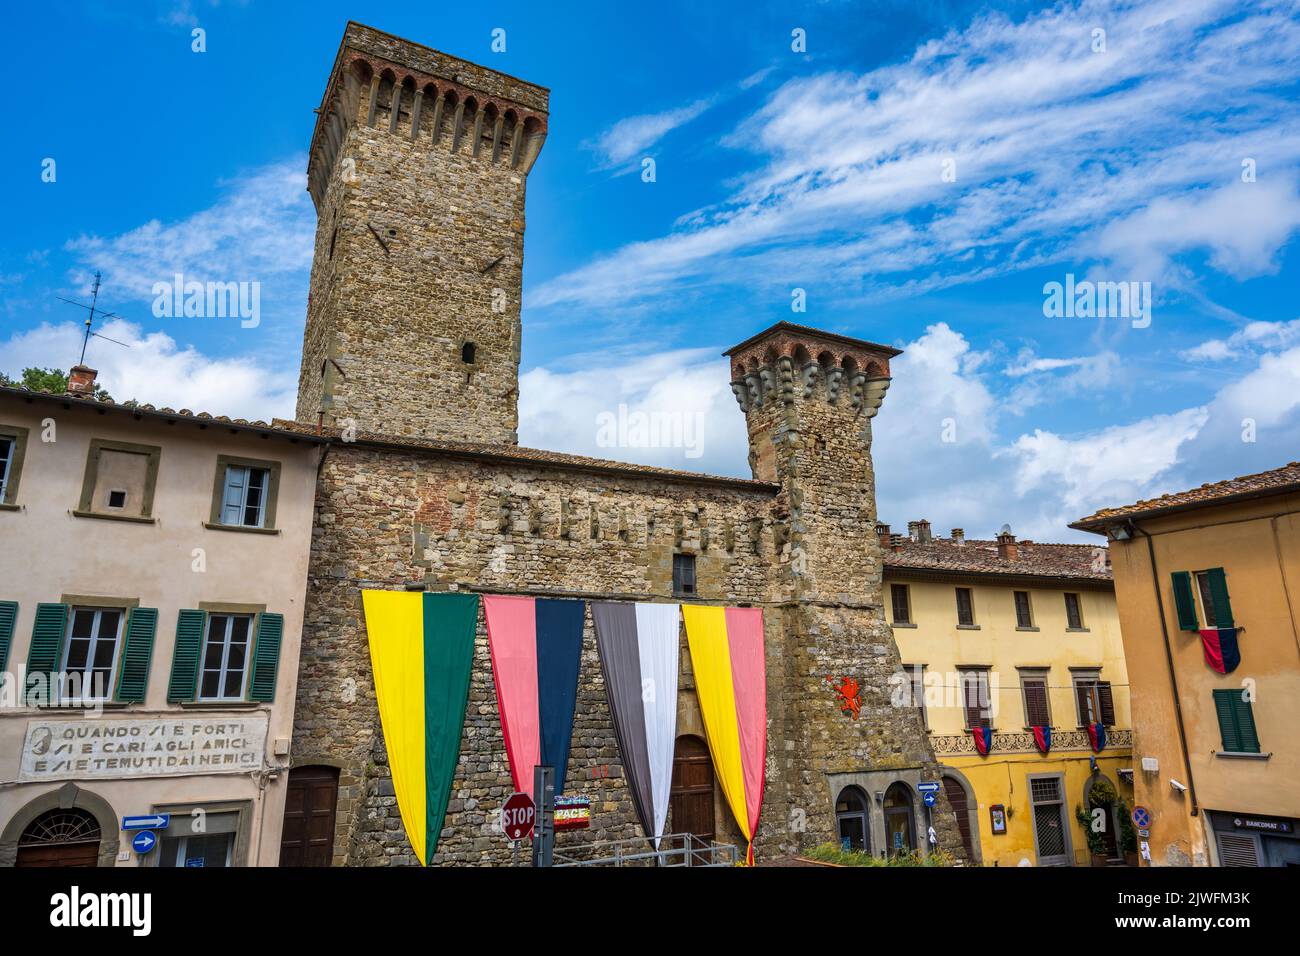 Former Teatro Rosini on Via Roma from Piazza del Tribunale in the medieval hilltop town of Lucignano in the Val di Chiana in Tuscany, Italy Stock Photo